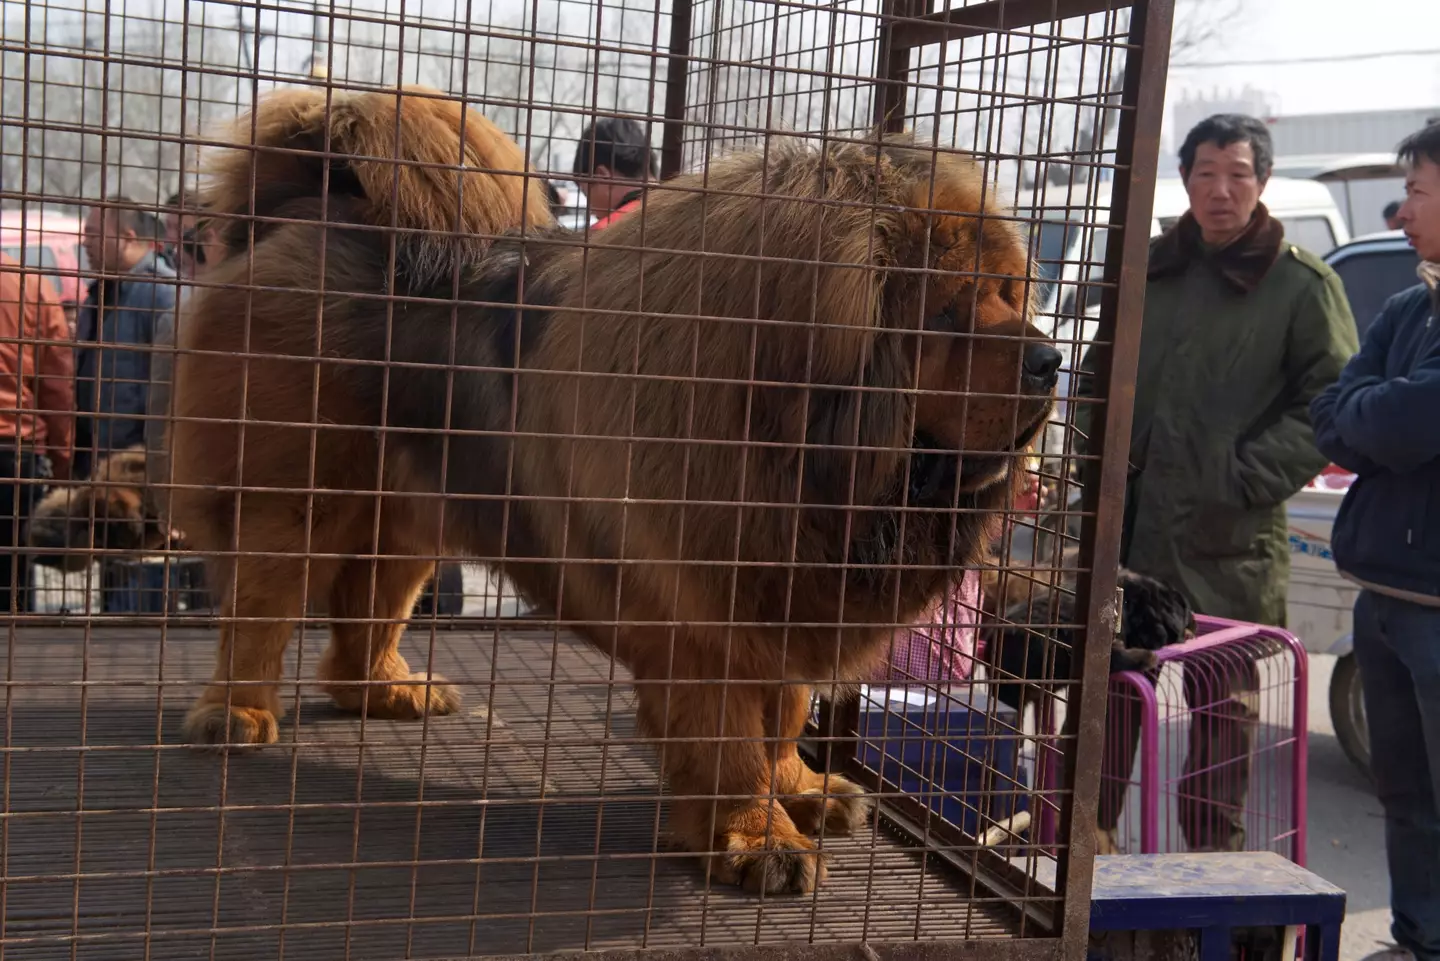 The family thought they owned a giant Tibetan mastiff.